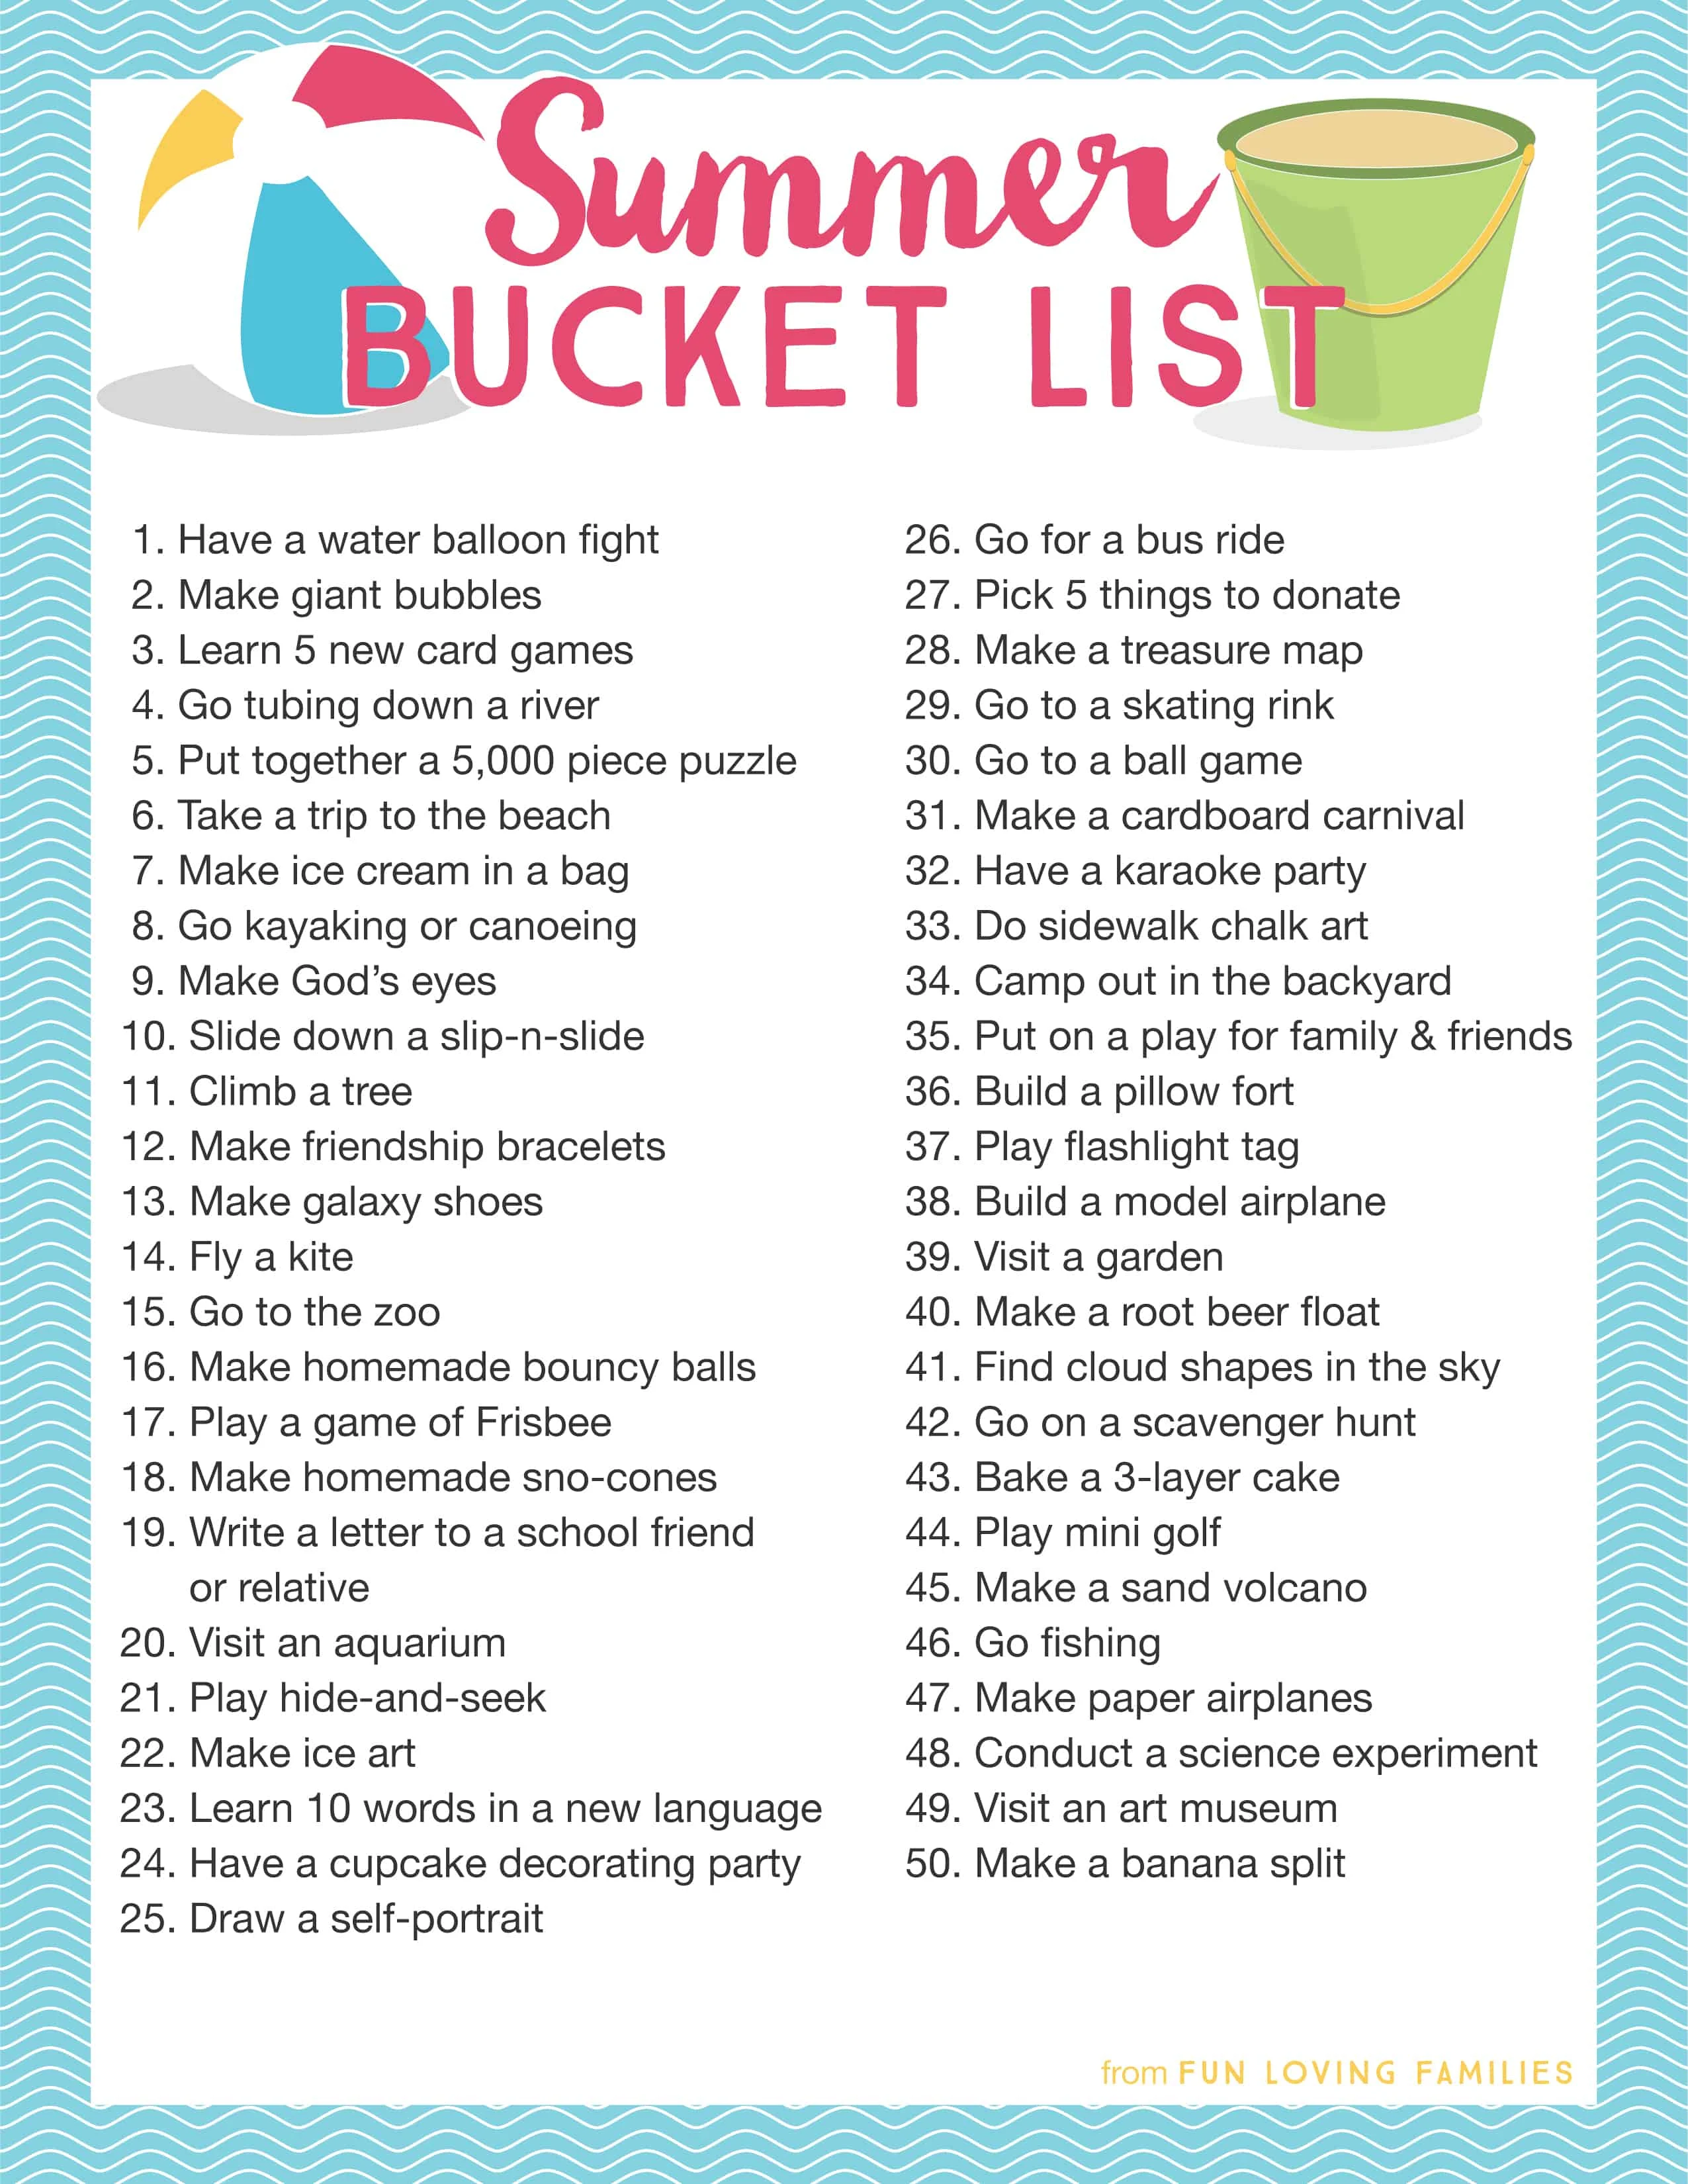 Grab our free Summer Bucket list printables to plan your fun-filled summer with the kids. Click through to see all 100 summer bucket list ideas.